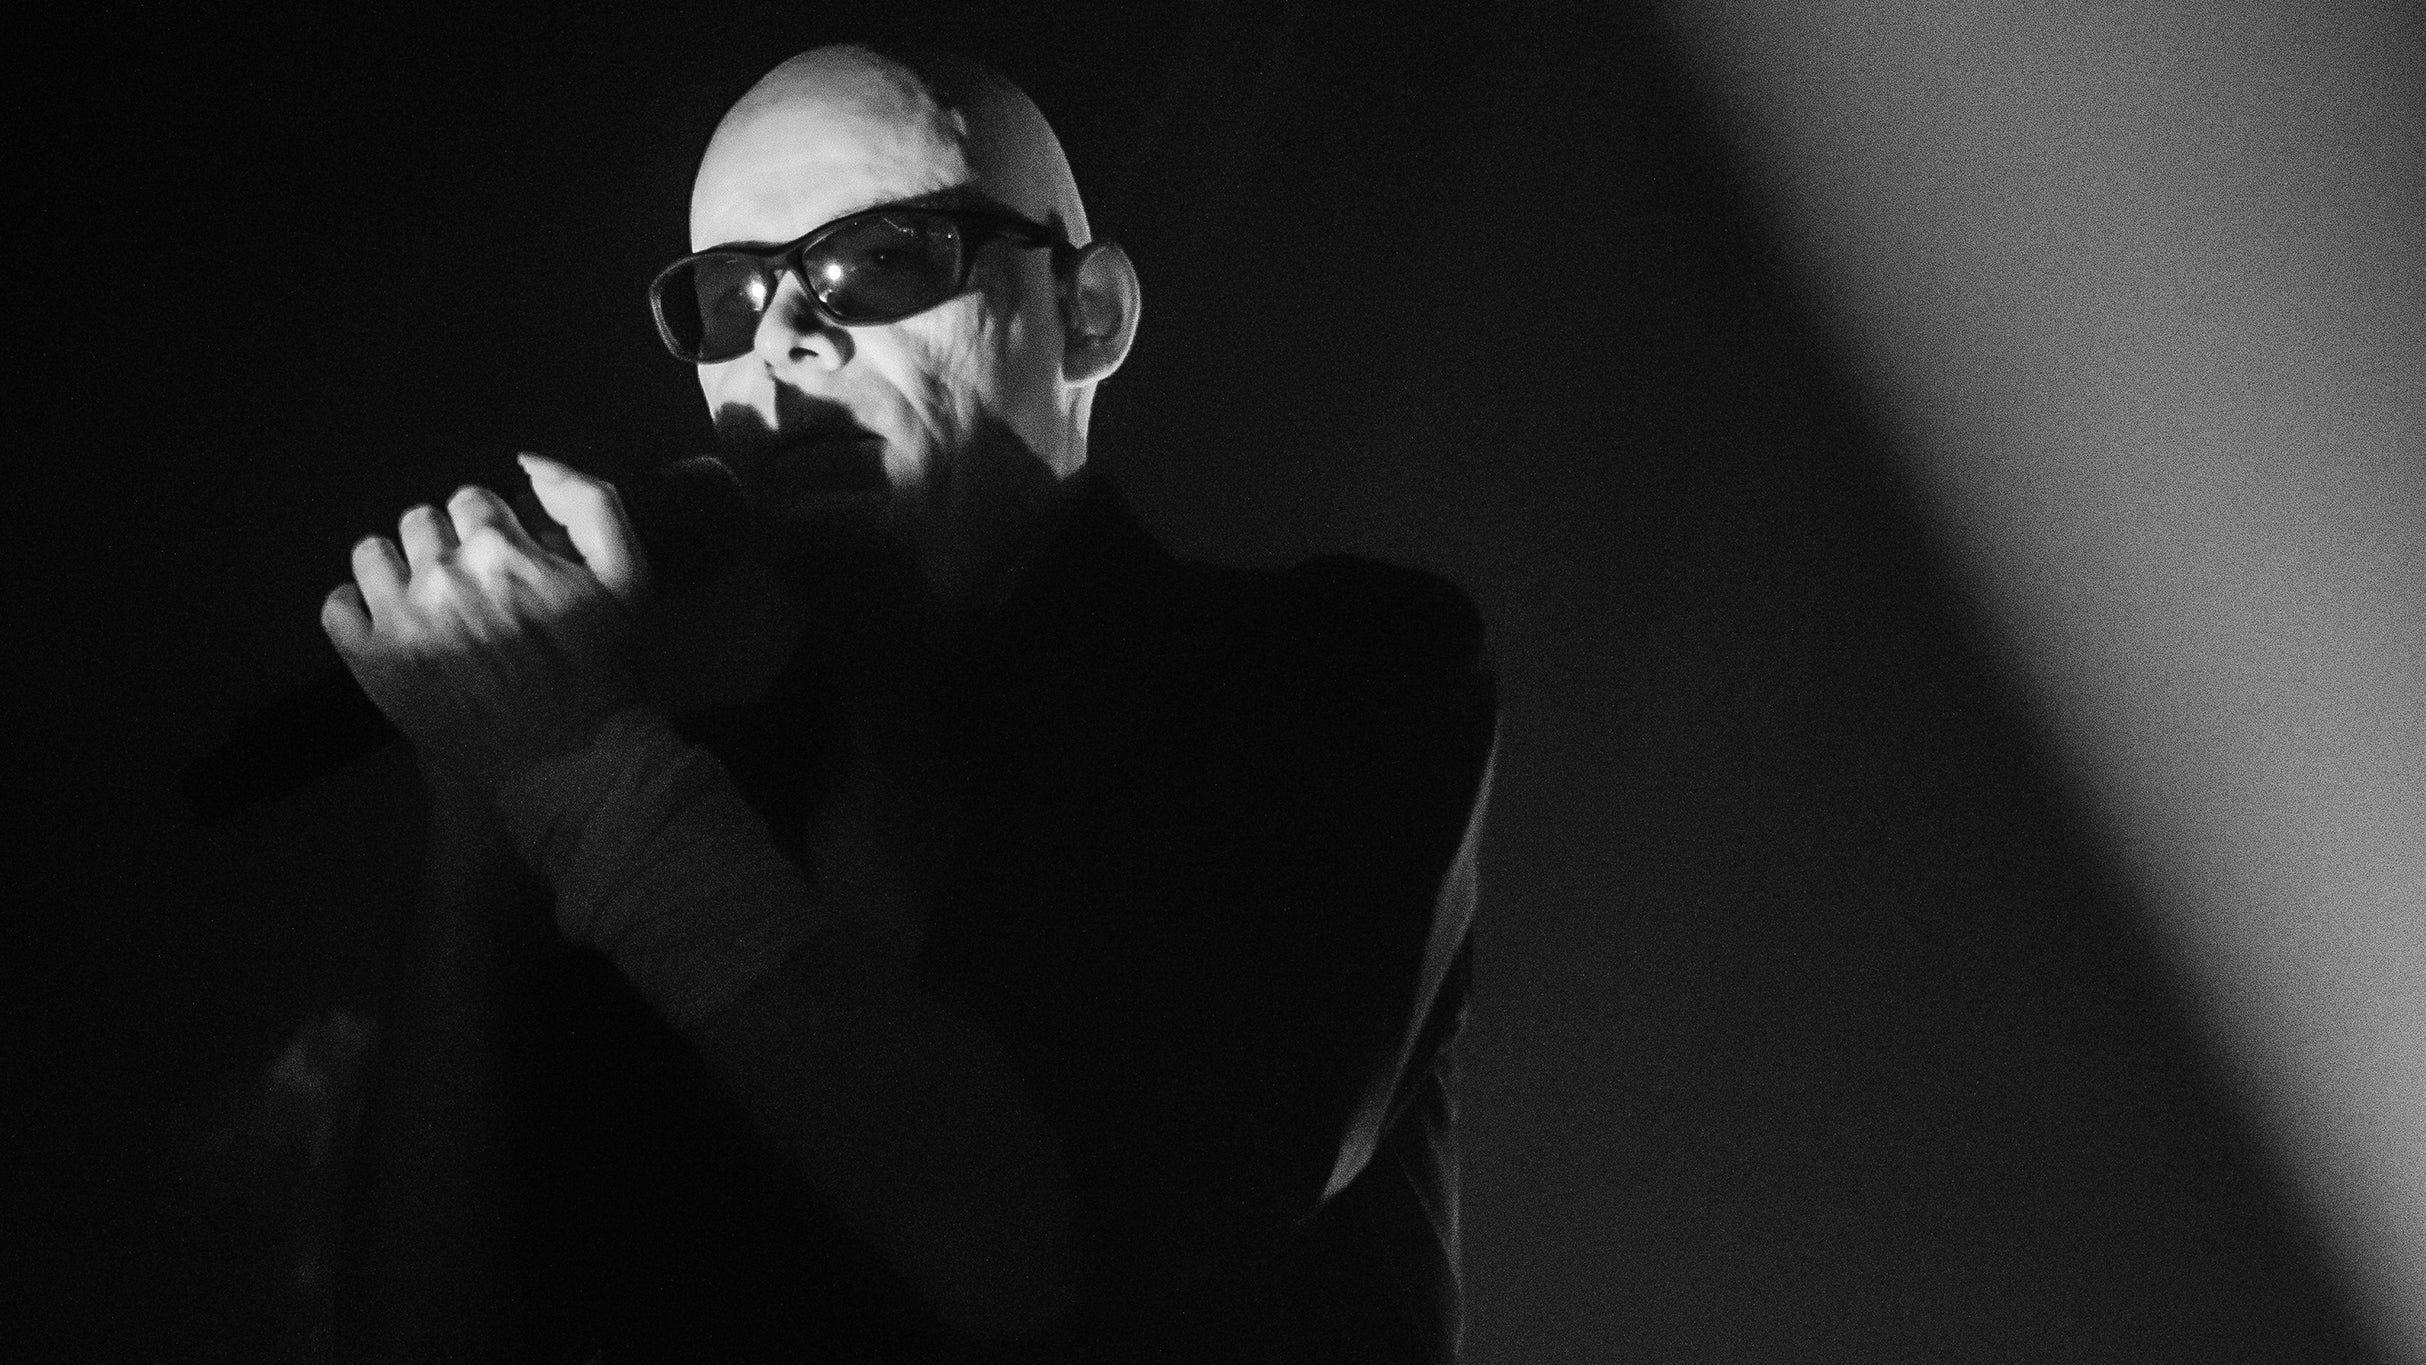 THE SISTERS OF MERCY w/ special guest BLAQK AUDIO presale password for your tickets in Chicago